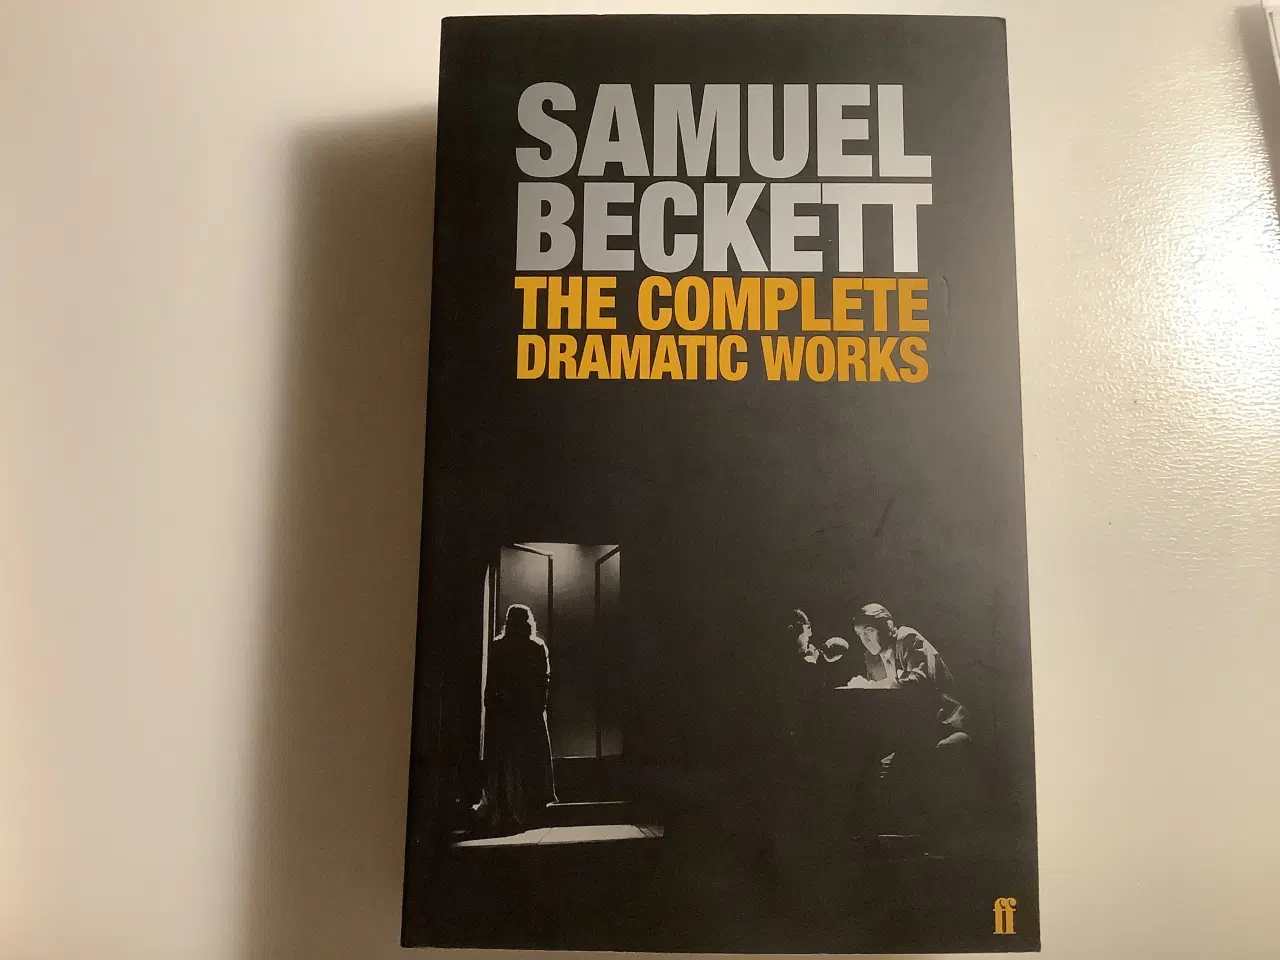 Billede 1 - S. Beckett. The Complete Dramatic Works